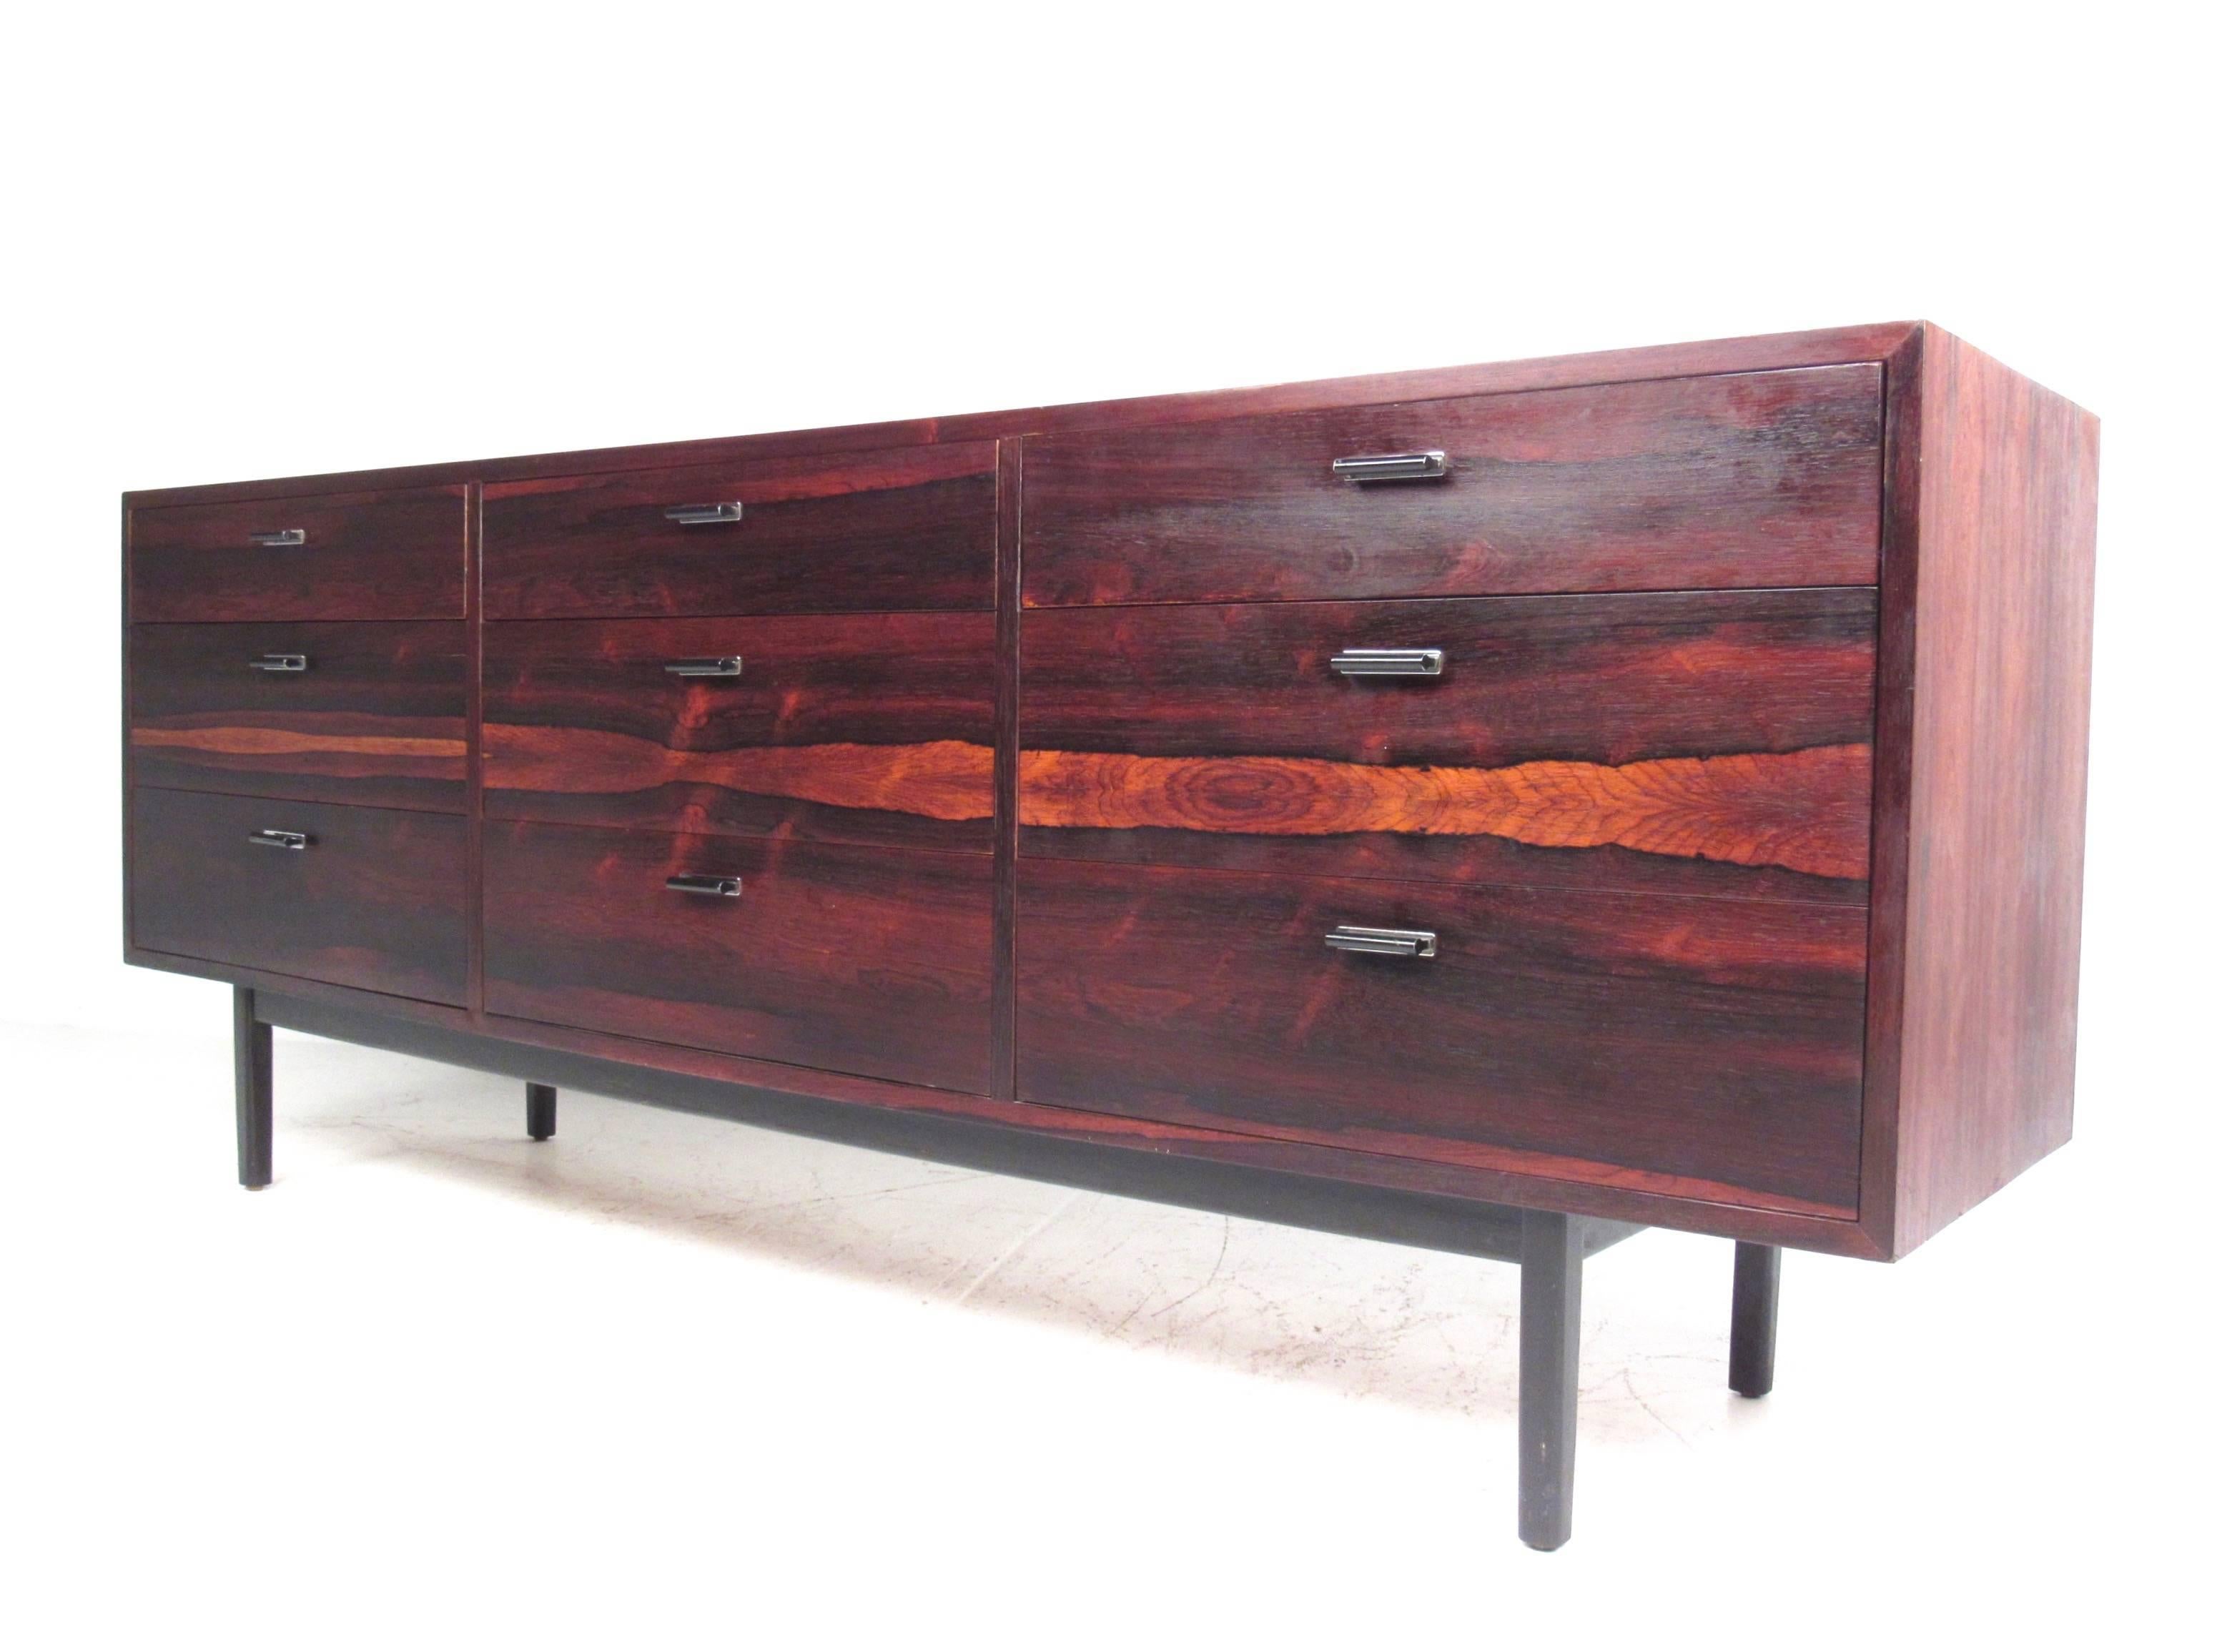 This stunning Mid-Century Modern dresser features nine spacious drawers for storage, unique Florence Knoll style design, and a beautiful vintage Rosewood finish. Stylish metal pulls and the vibrant wood finish make this an impressive addition to